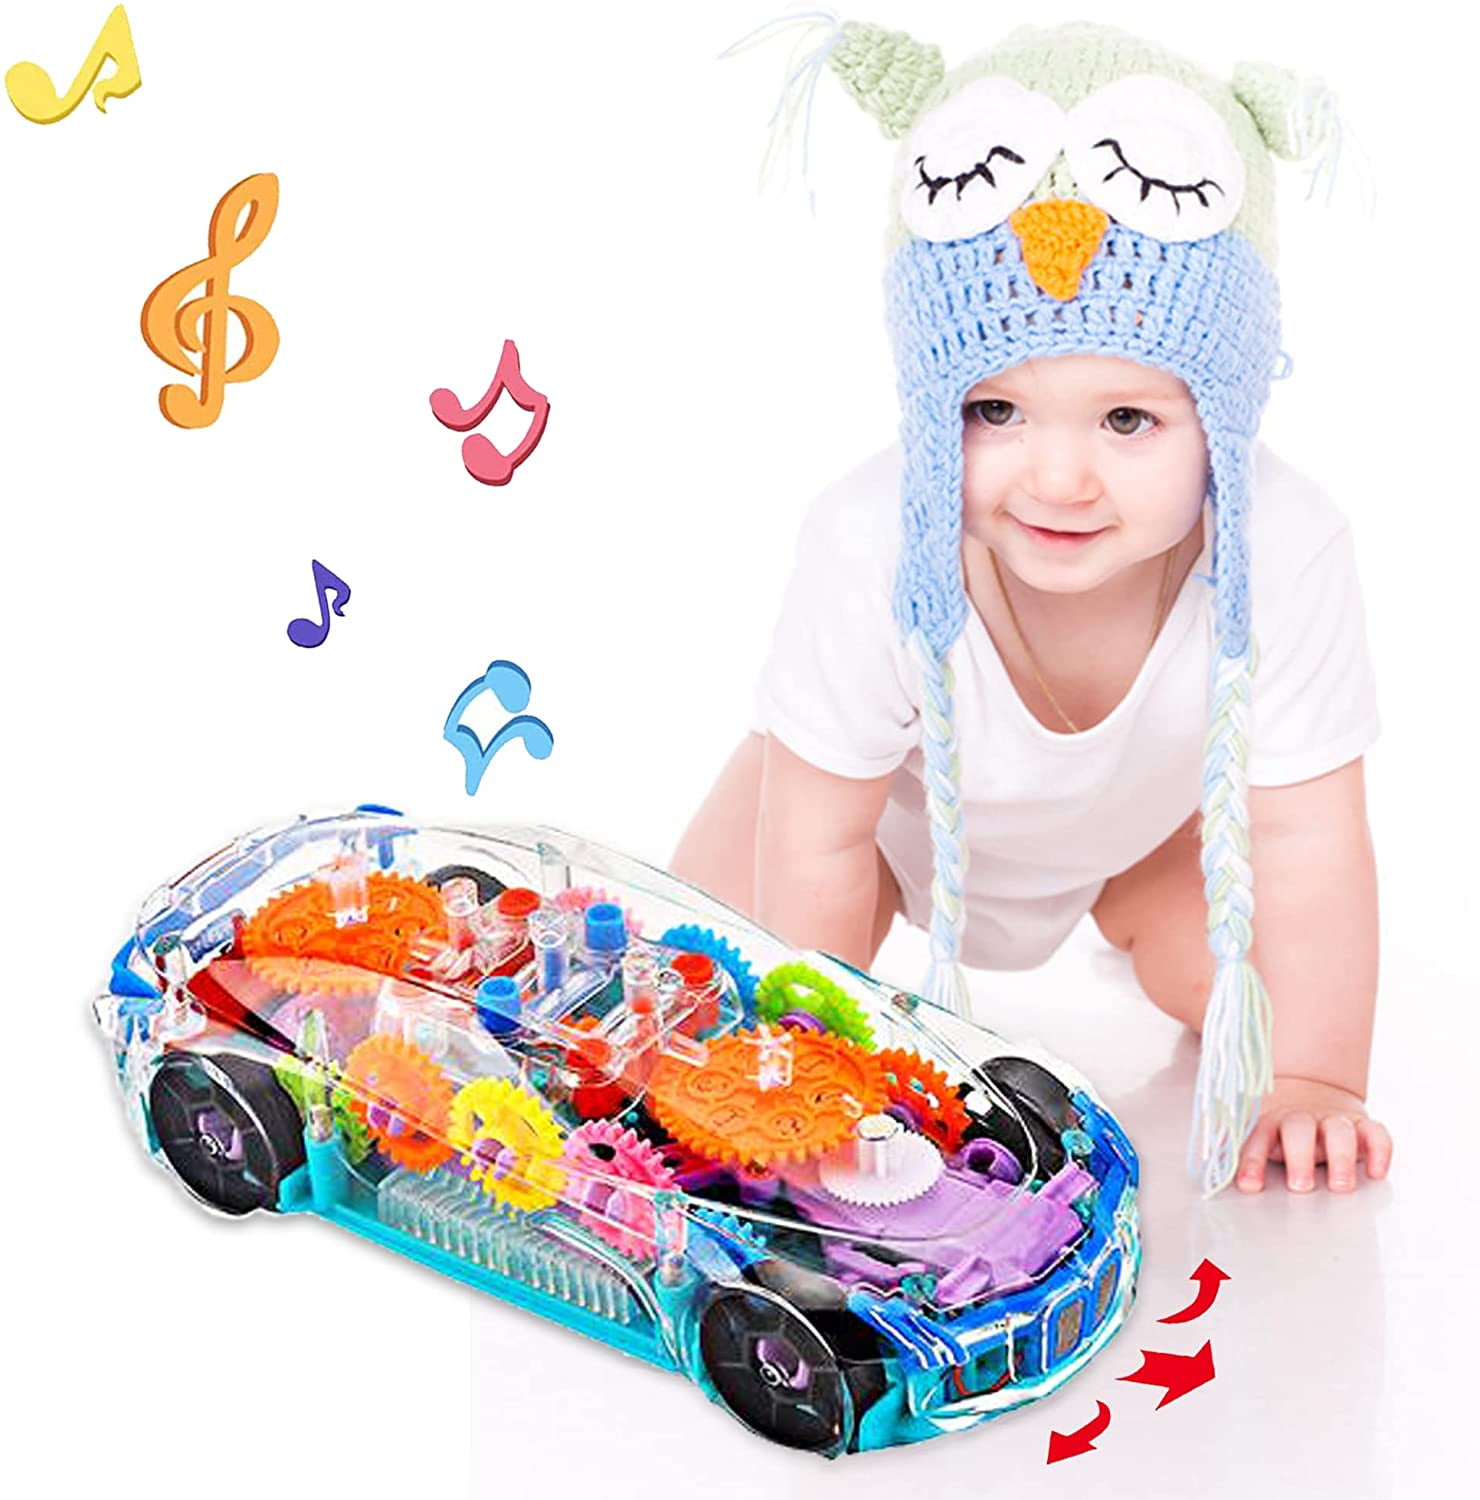 Toy Deals: Today's  Lightning Deals!  Kids birthday gifts, Cool toys  for boys, Best kids toys